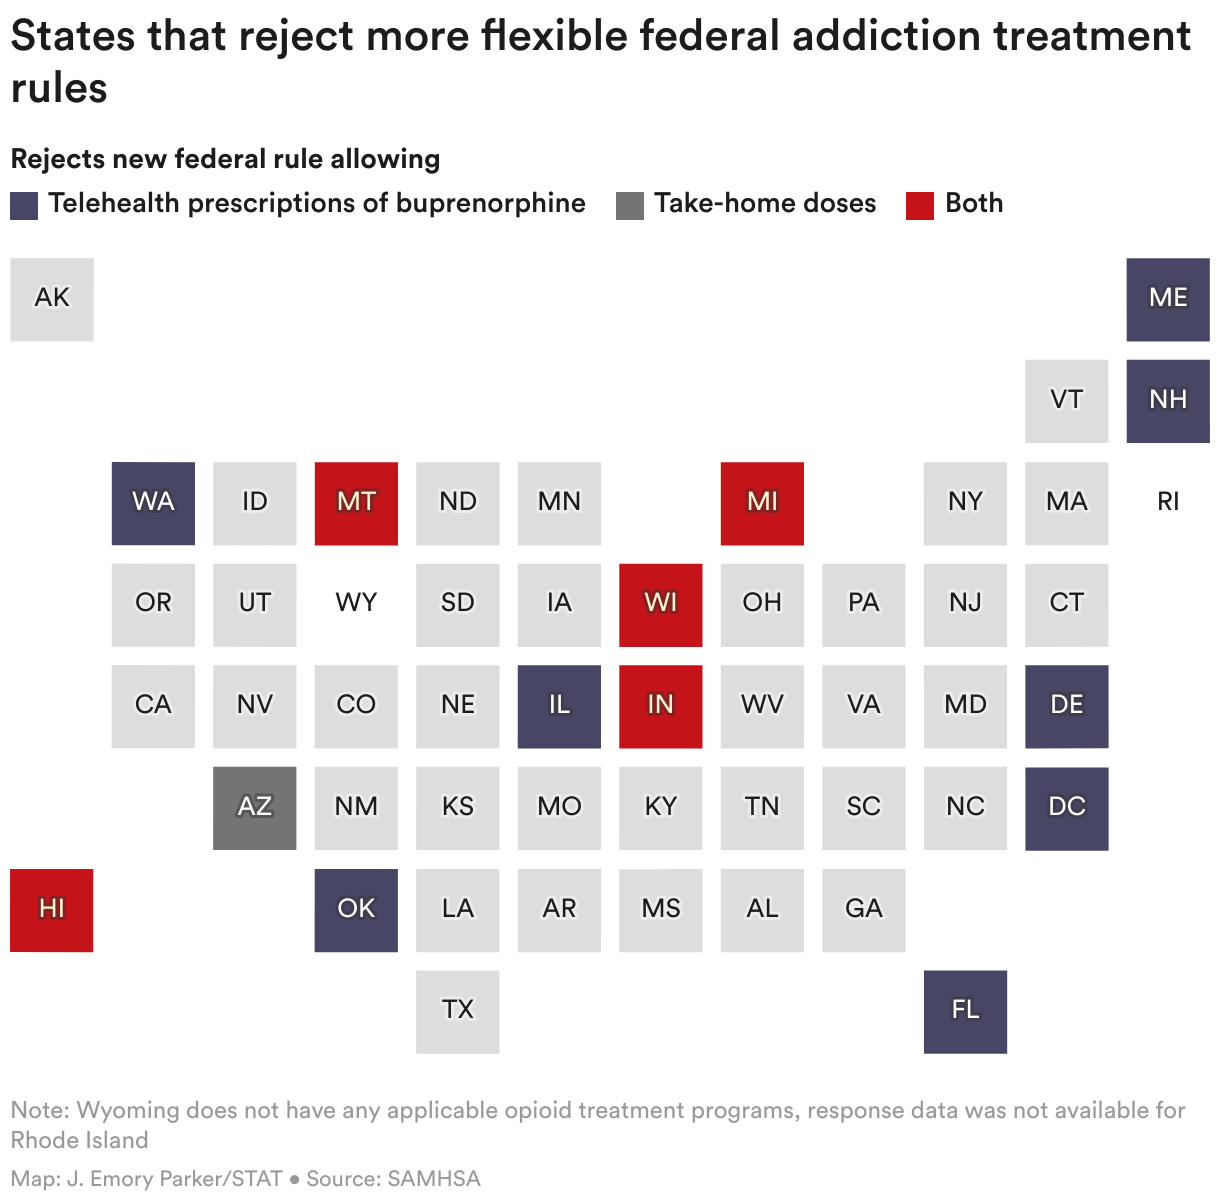 Map showing that 8 states rejects new rules allowing more flexible telehealth prescriptions of buprenorphine, 1 state rejects new rules allowing for take-home doses, and 5 states reject both rules.